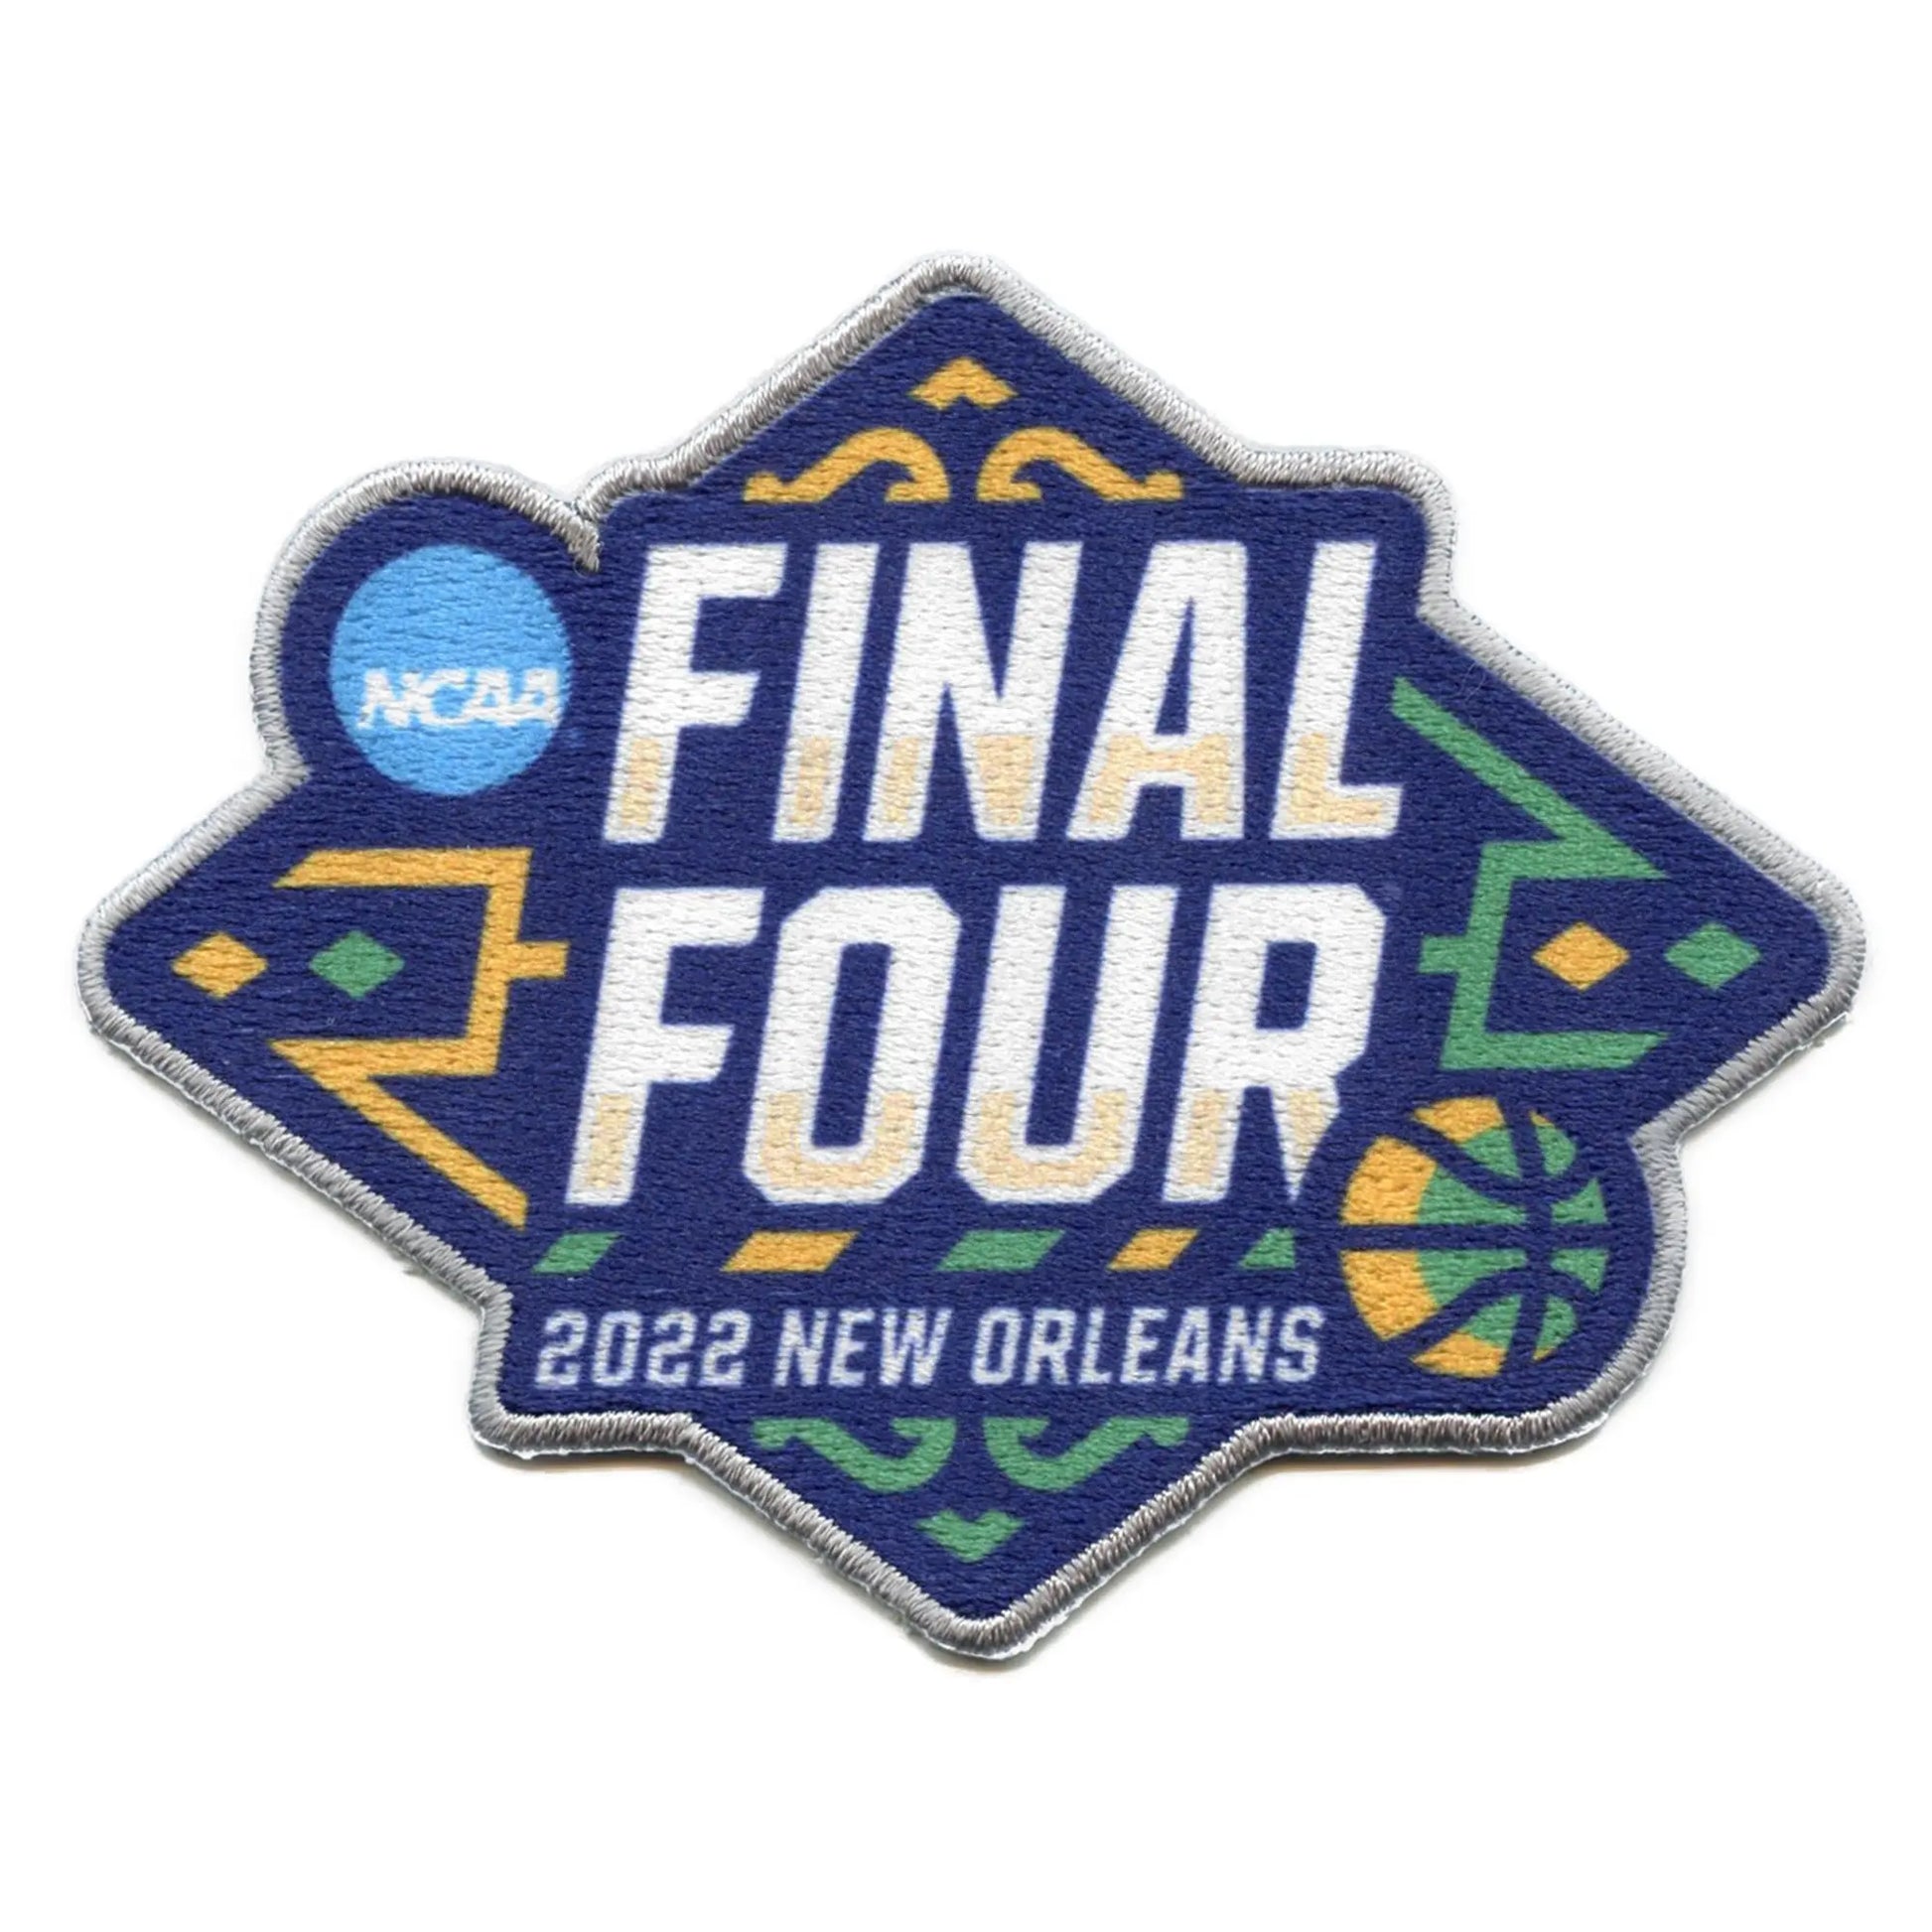 2022 New Orleans NCAA Men's Basketball Final Four Patch 